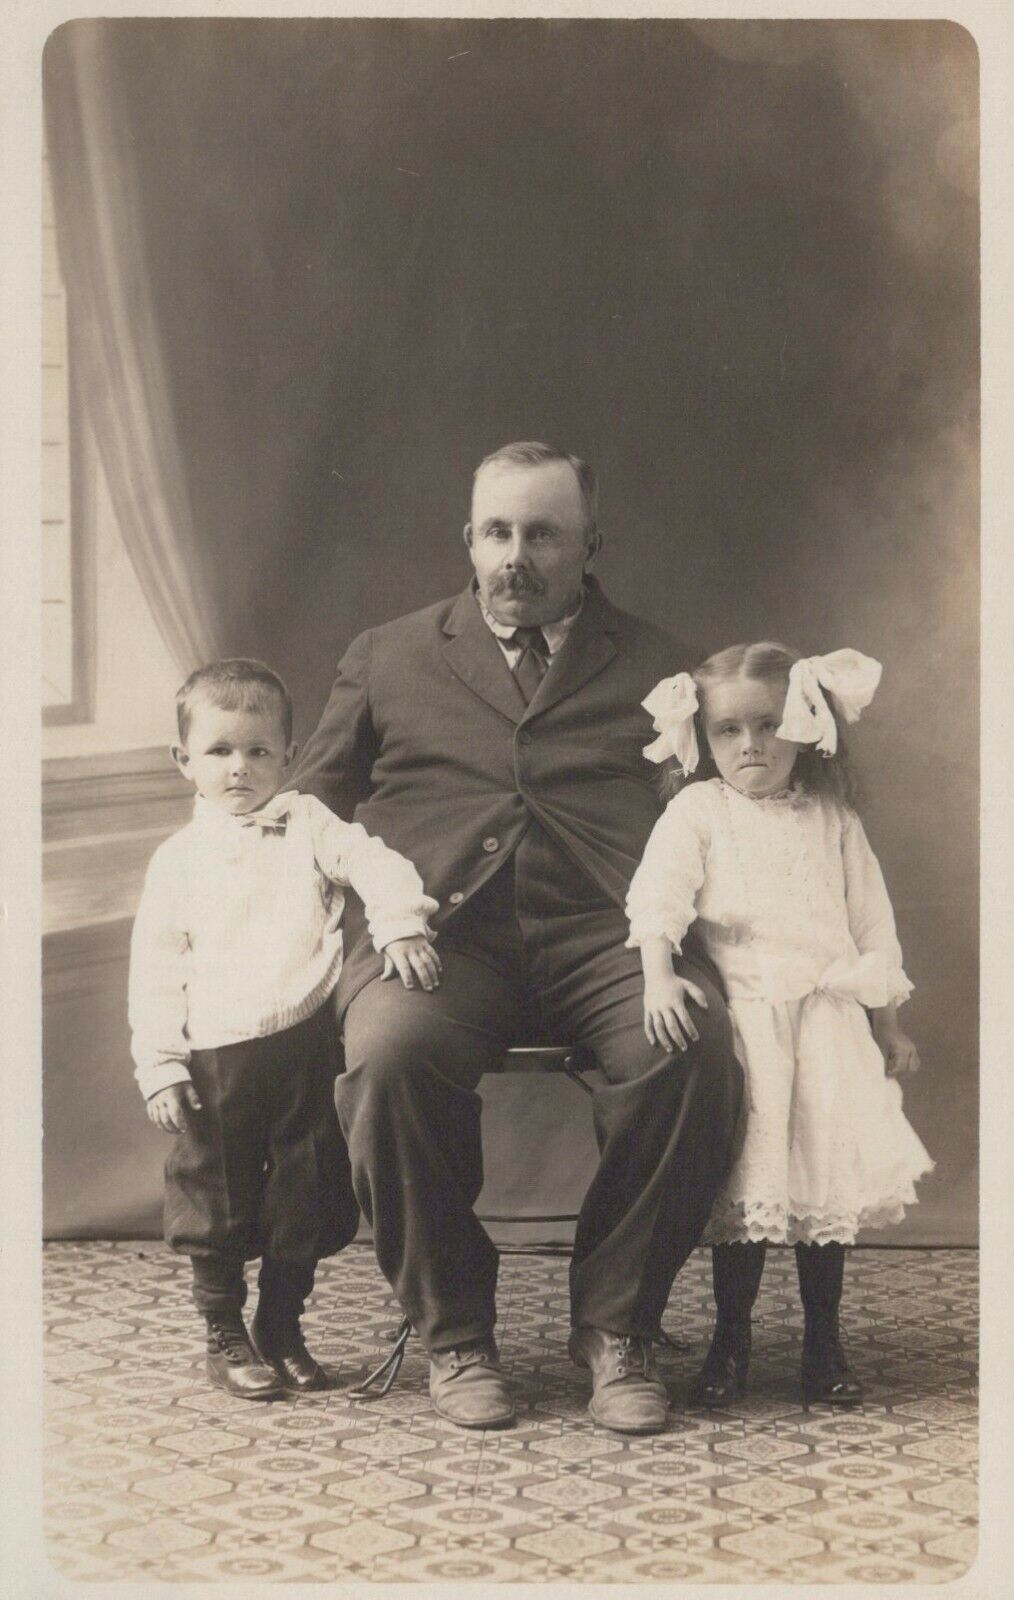 Little Children And Father Big Bows In Hair Vintage Real Photo RPPC Post Card